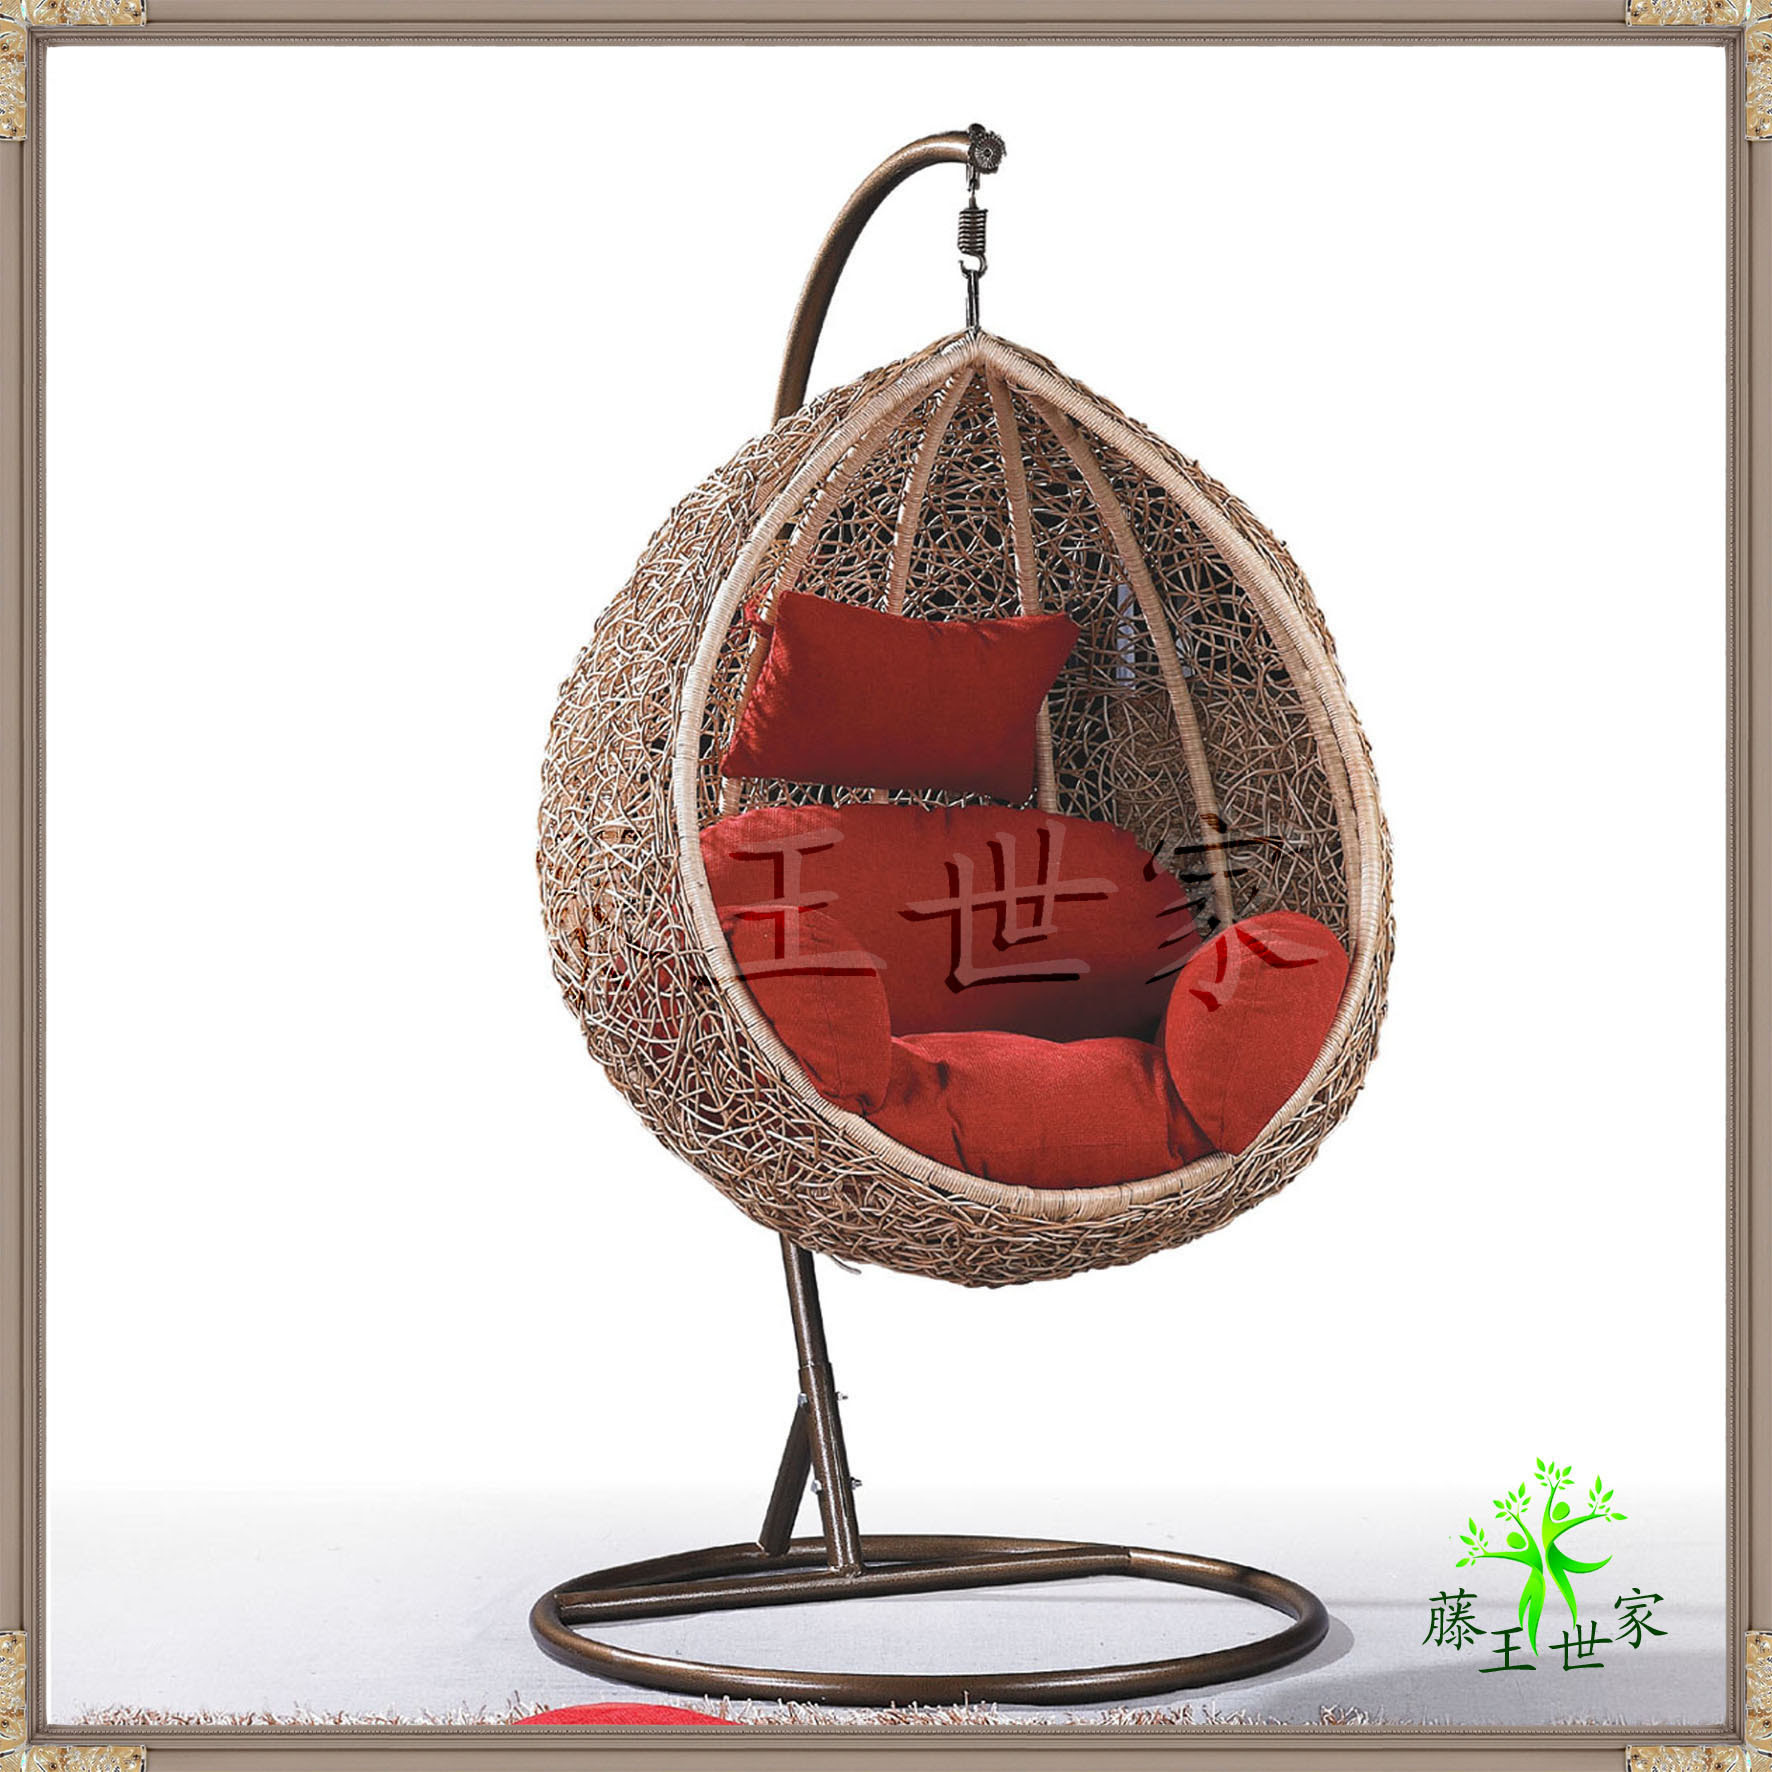 Hanging Chairs for Bedrooms Promotion-Online Shopping for ...